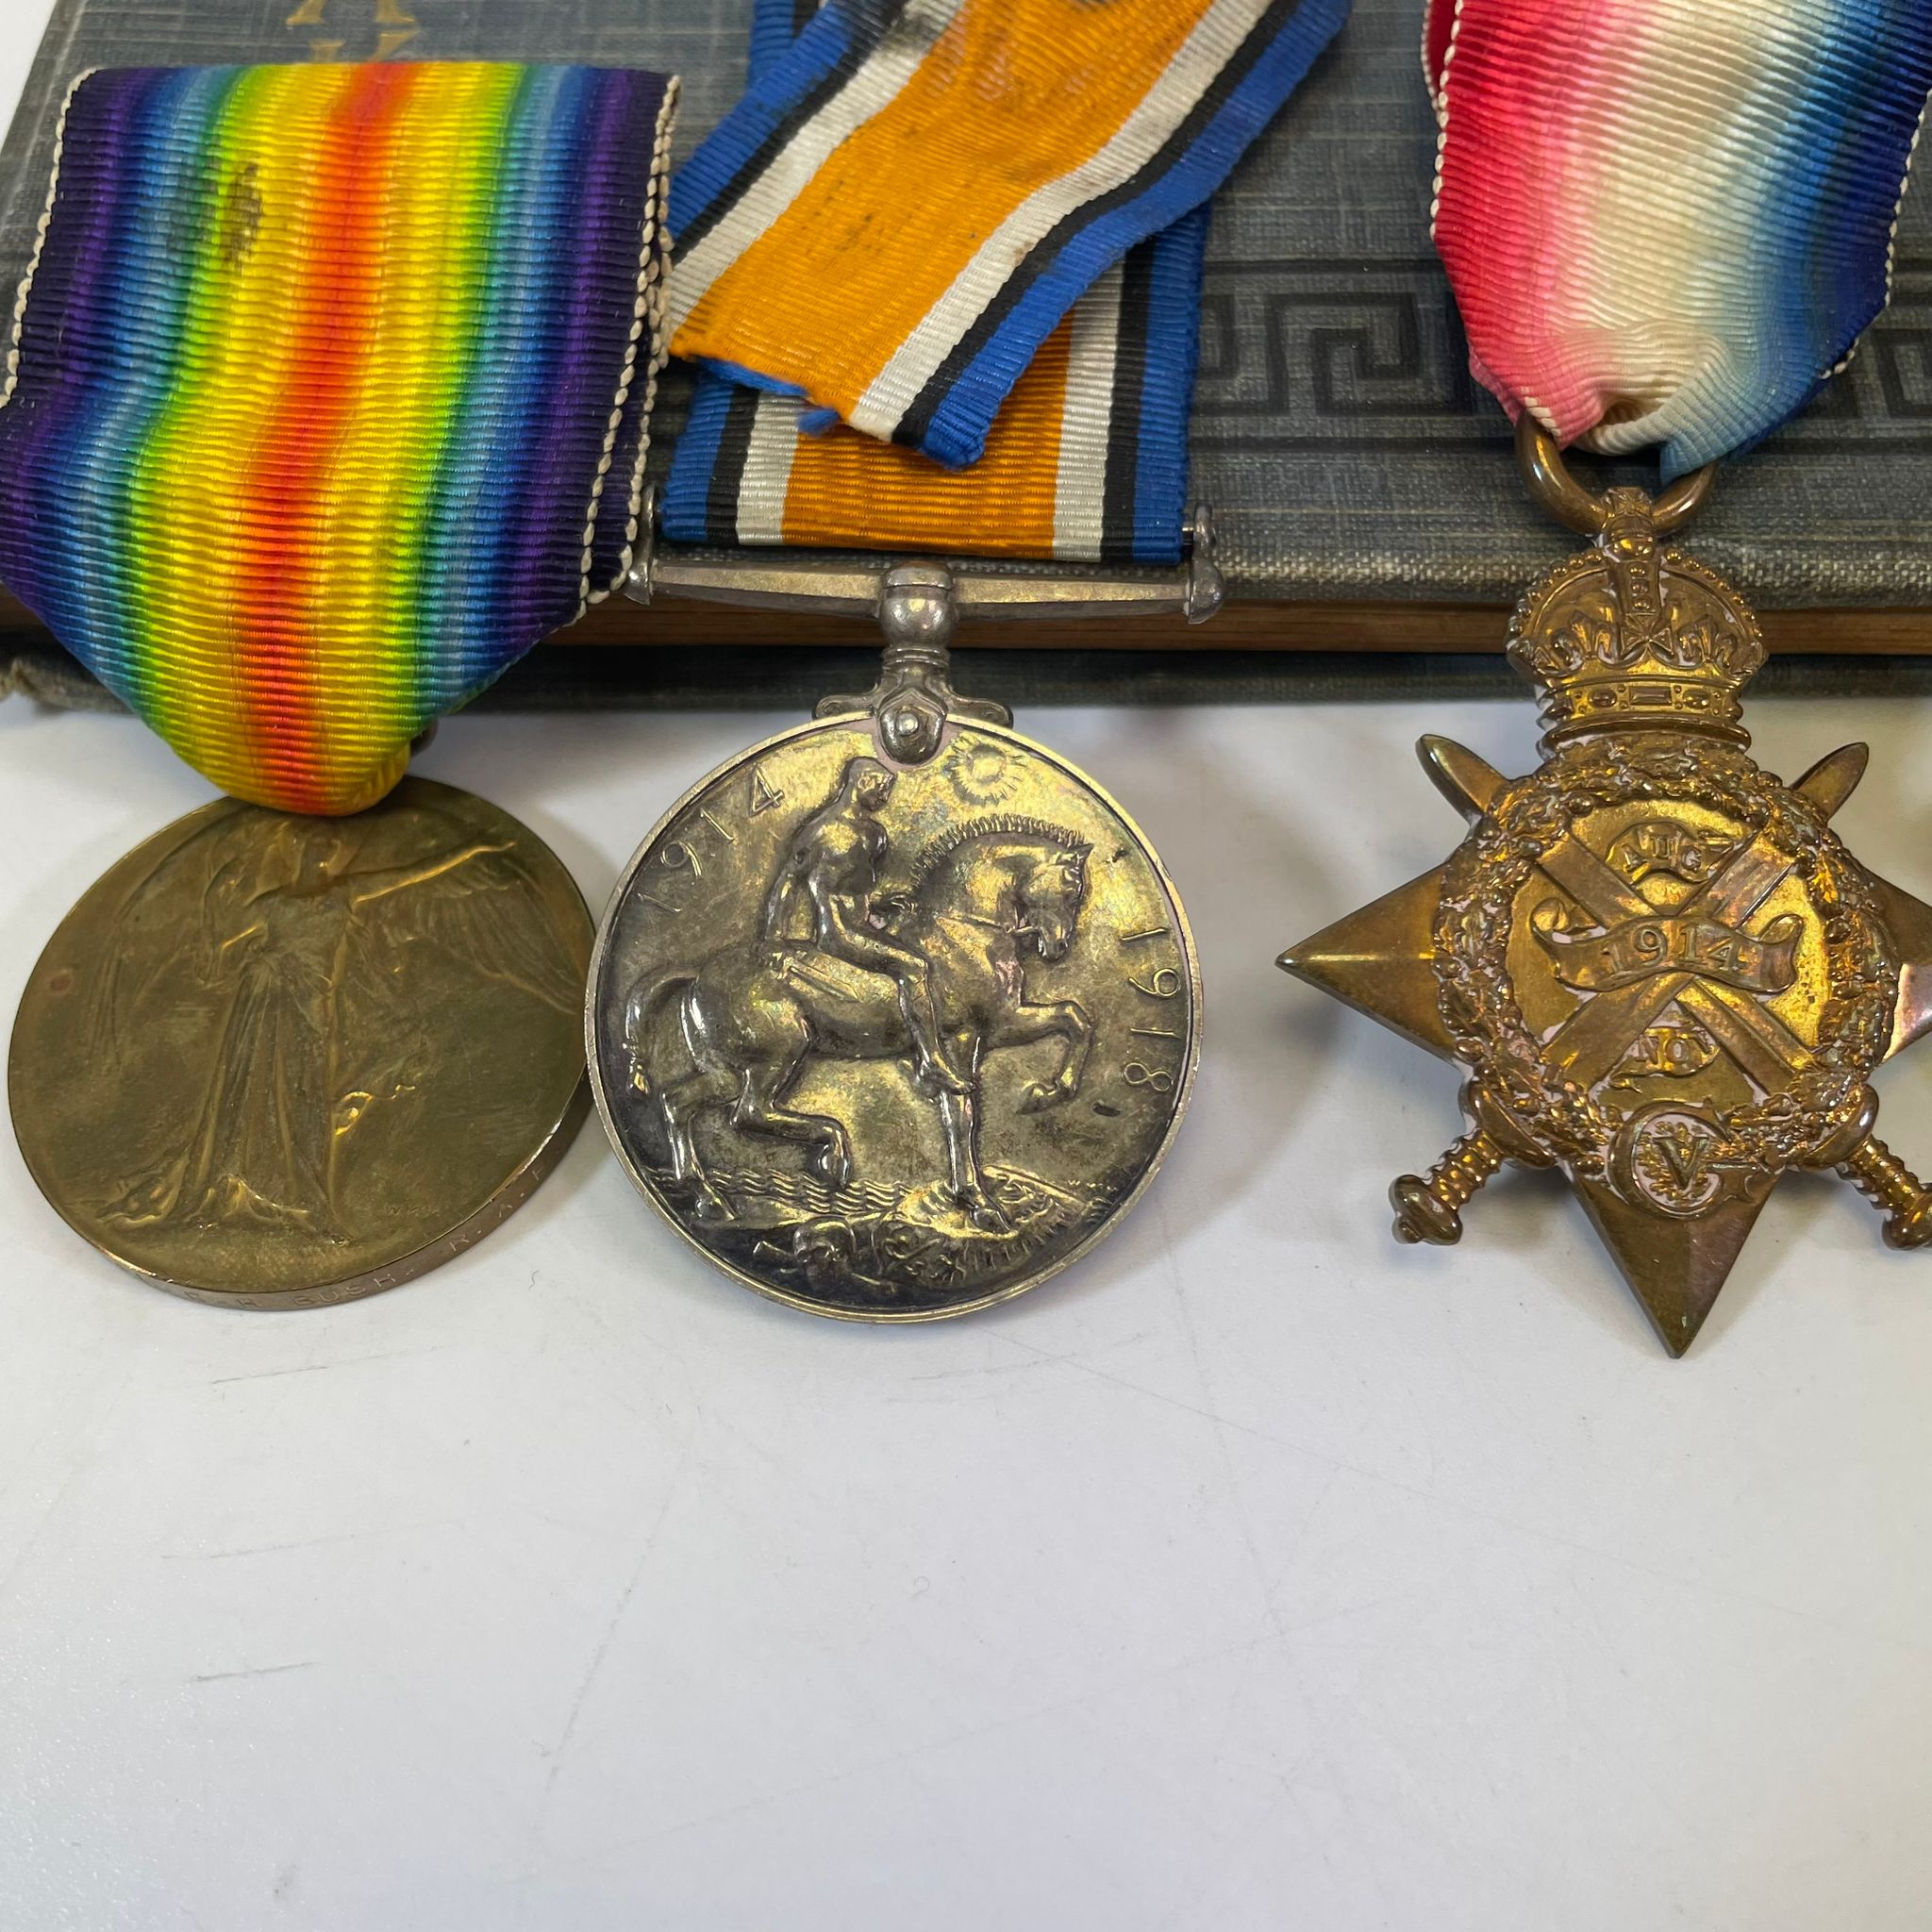 WWI medal trio awarded to G H Bush BRCS & Ost JJ / 20837 CPL GH Bush RAF along with a wartime diary, - Image 12 of 14